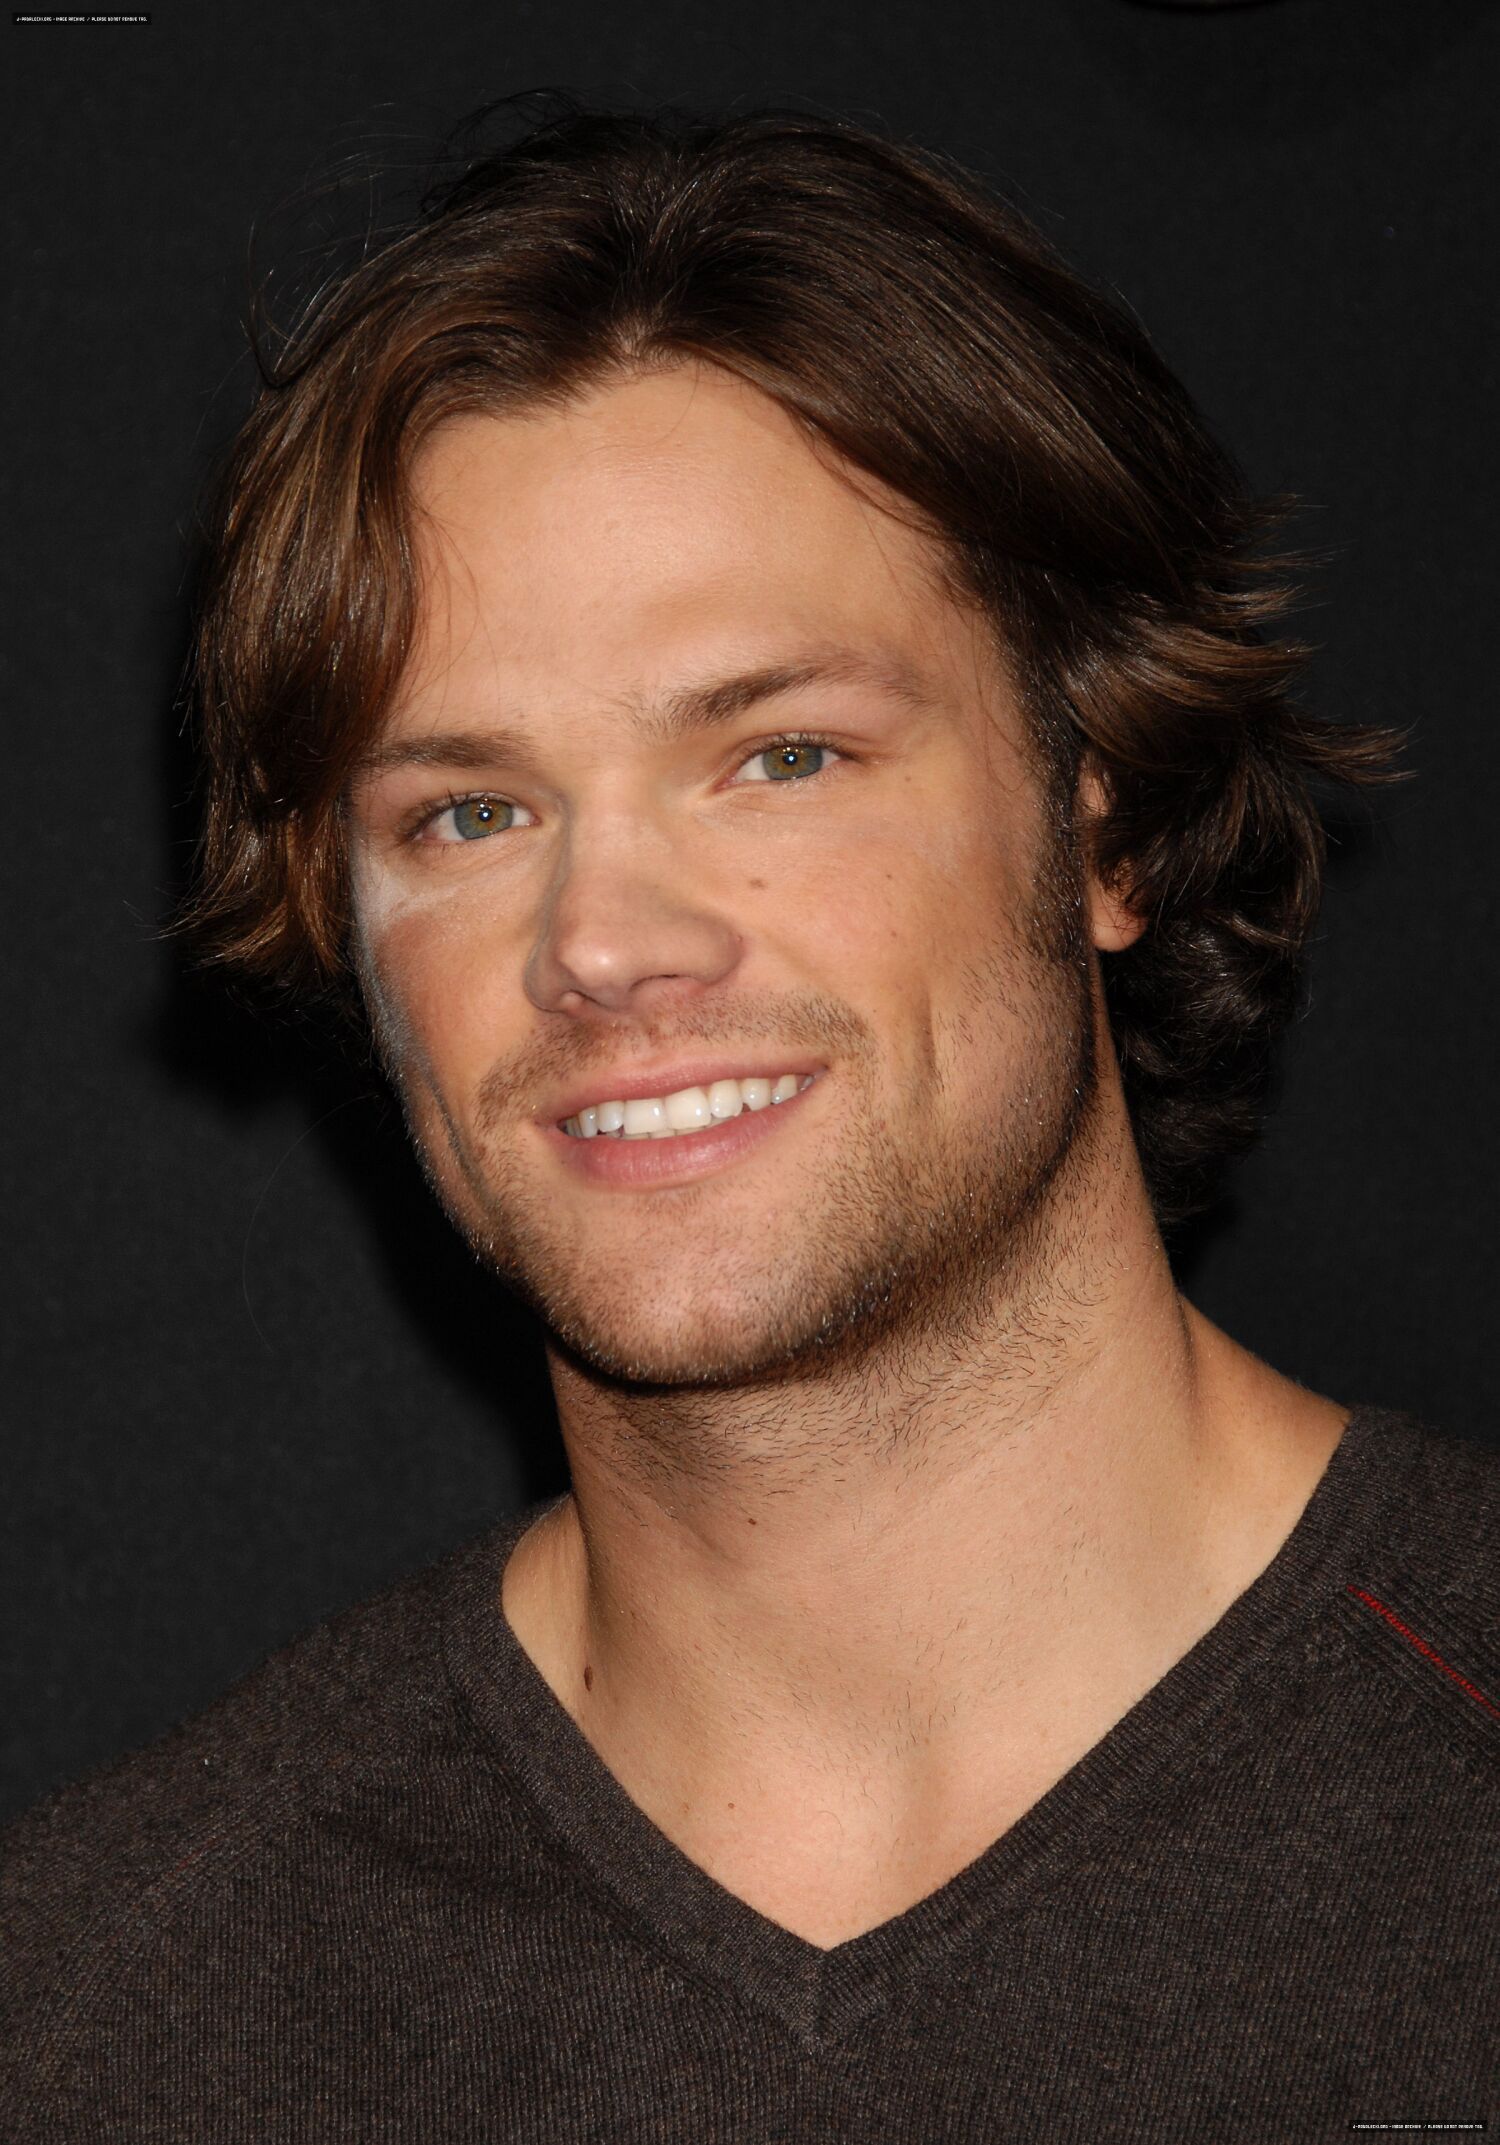 Friday the 13th Hollywood Premiere - Jared Padalecki Photo (